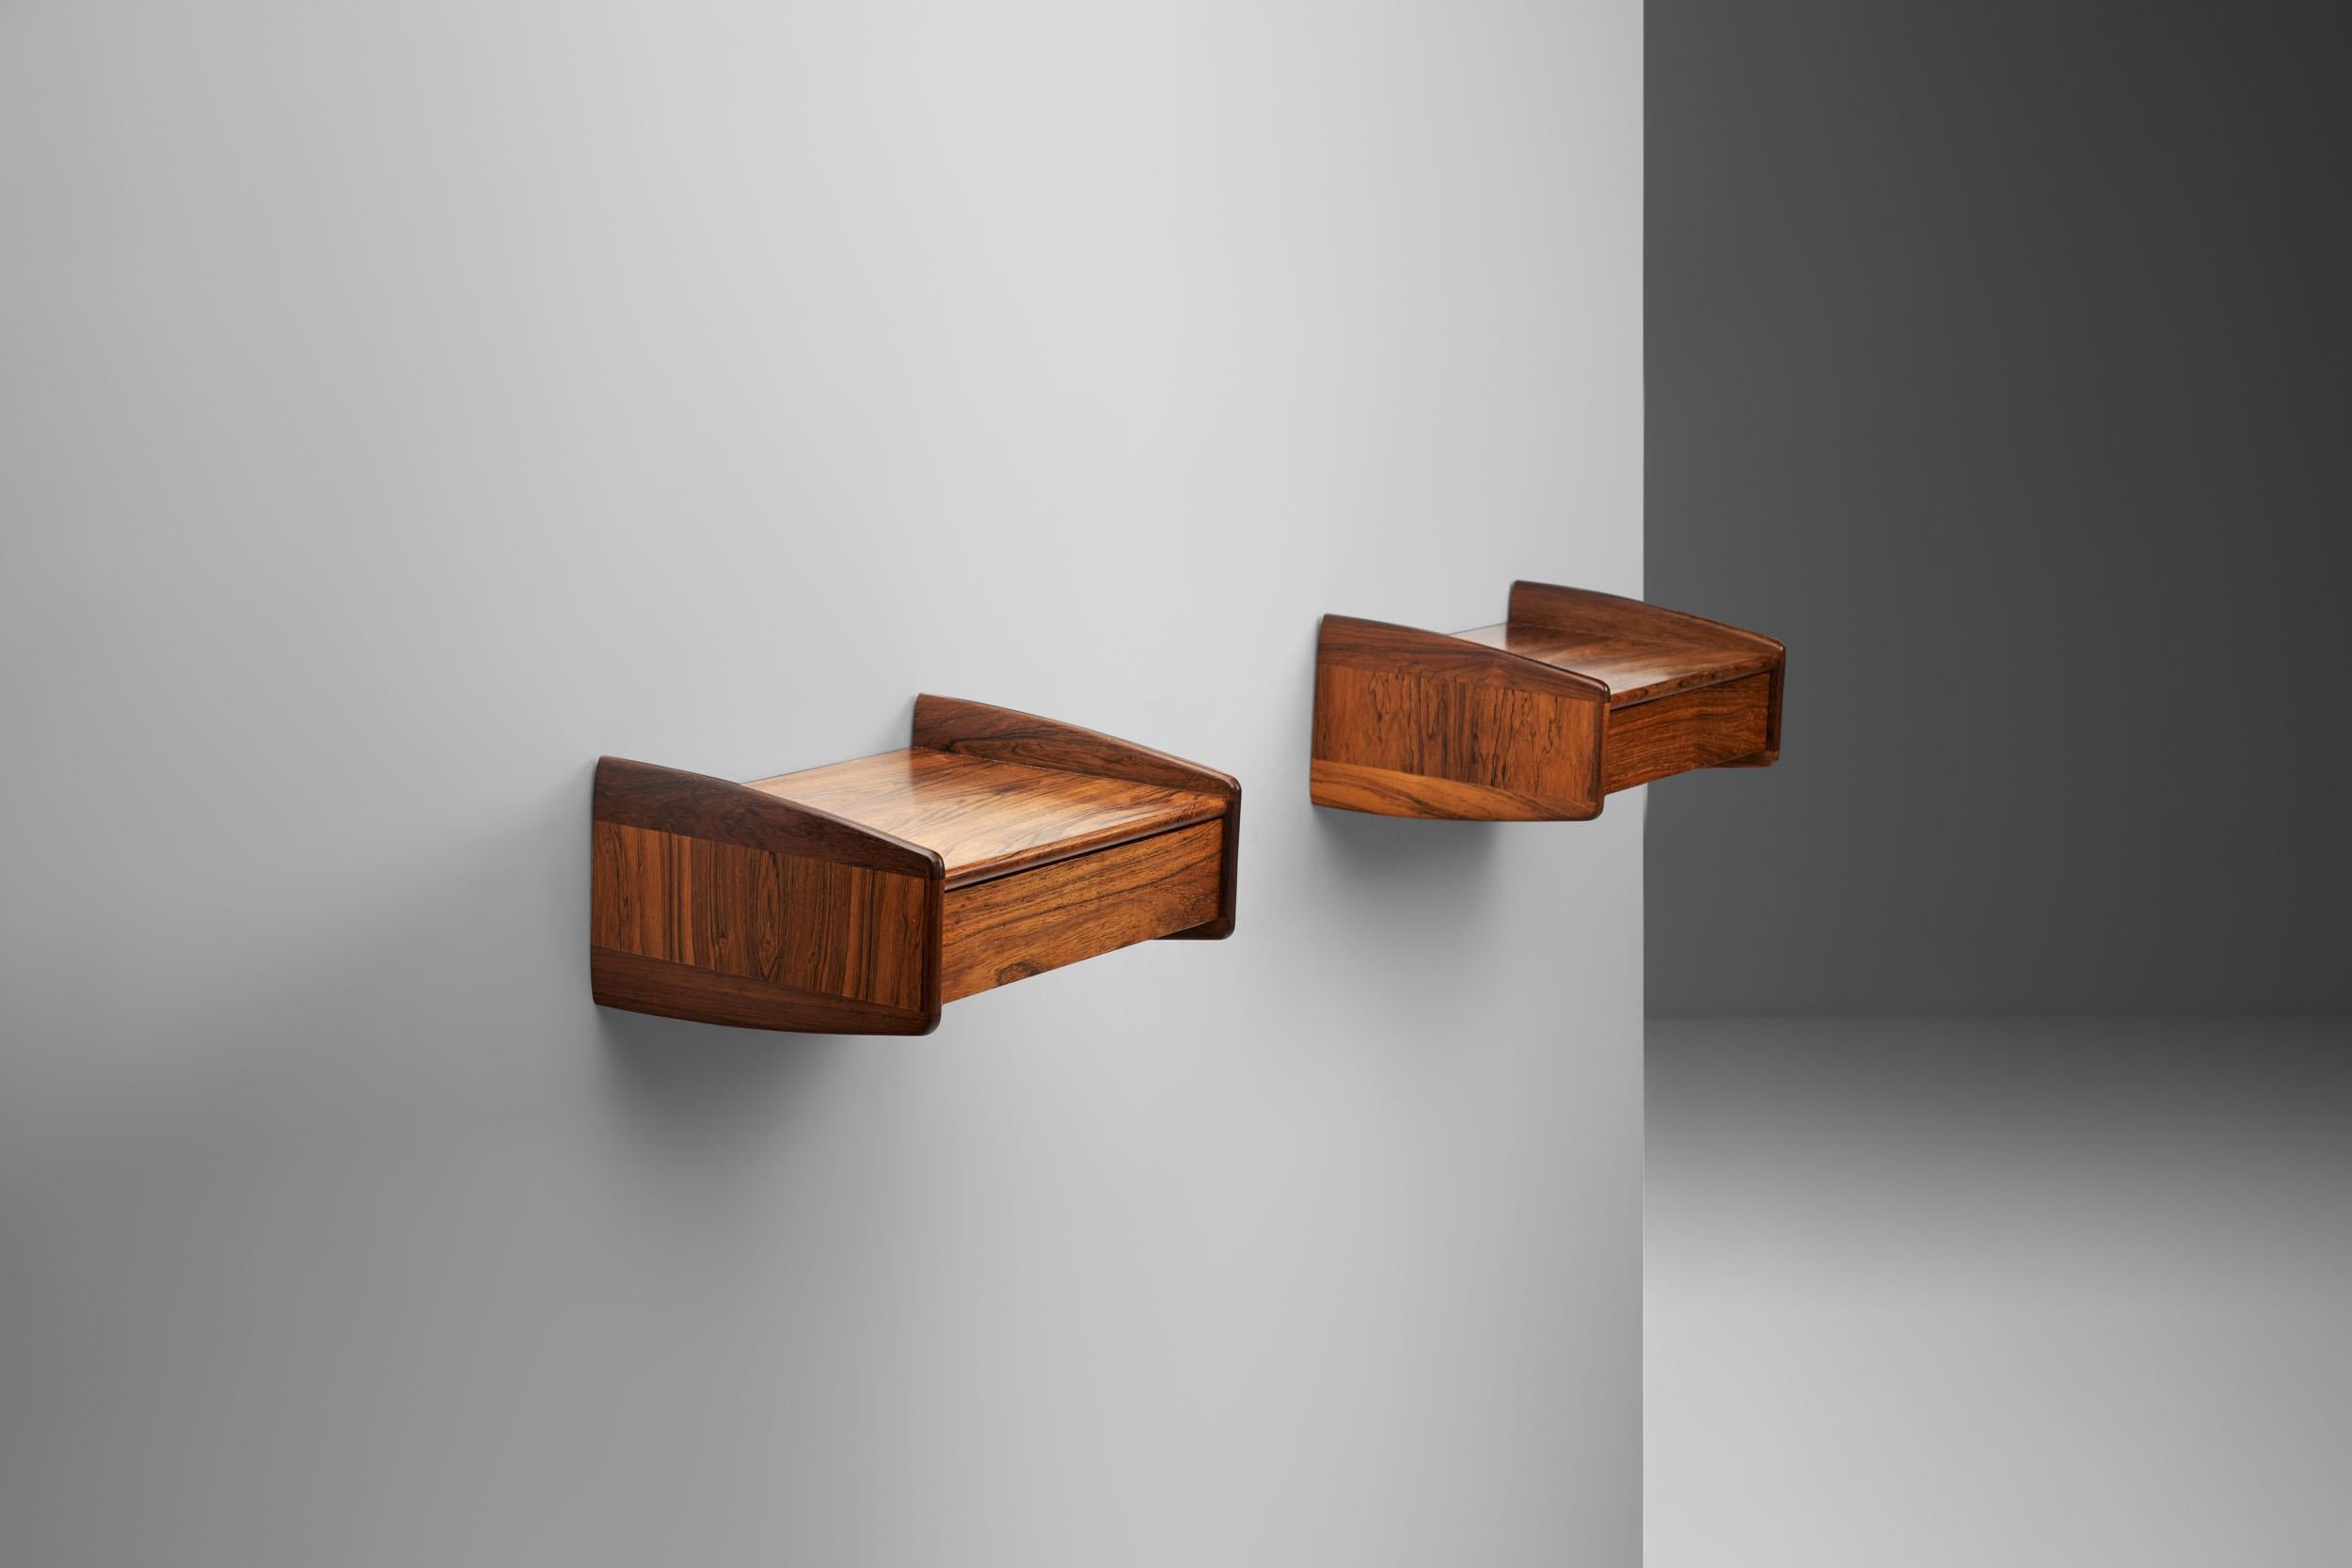 This pair of Danish mid-century wall mounted tables is very stylish in its elegance and outstanding wood material. Featuring smooth lines and solid wooden edges, these floating tables are of the highest quality.

Expert Danish cabinetry skills are